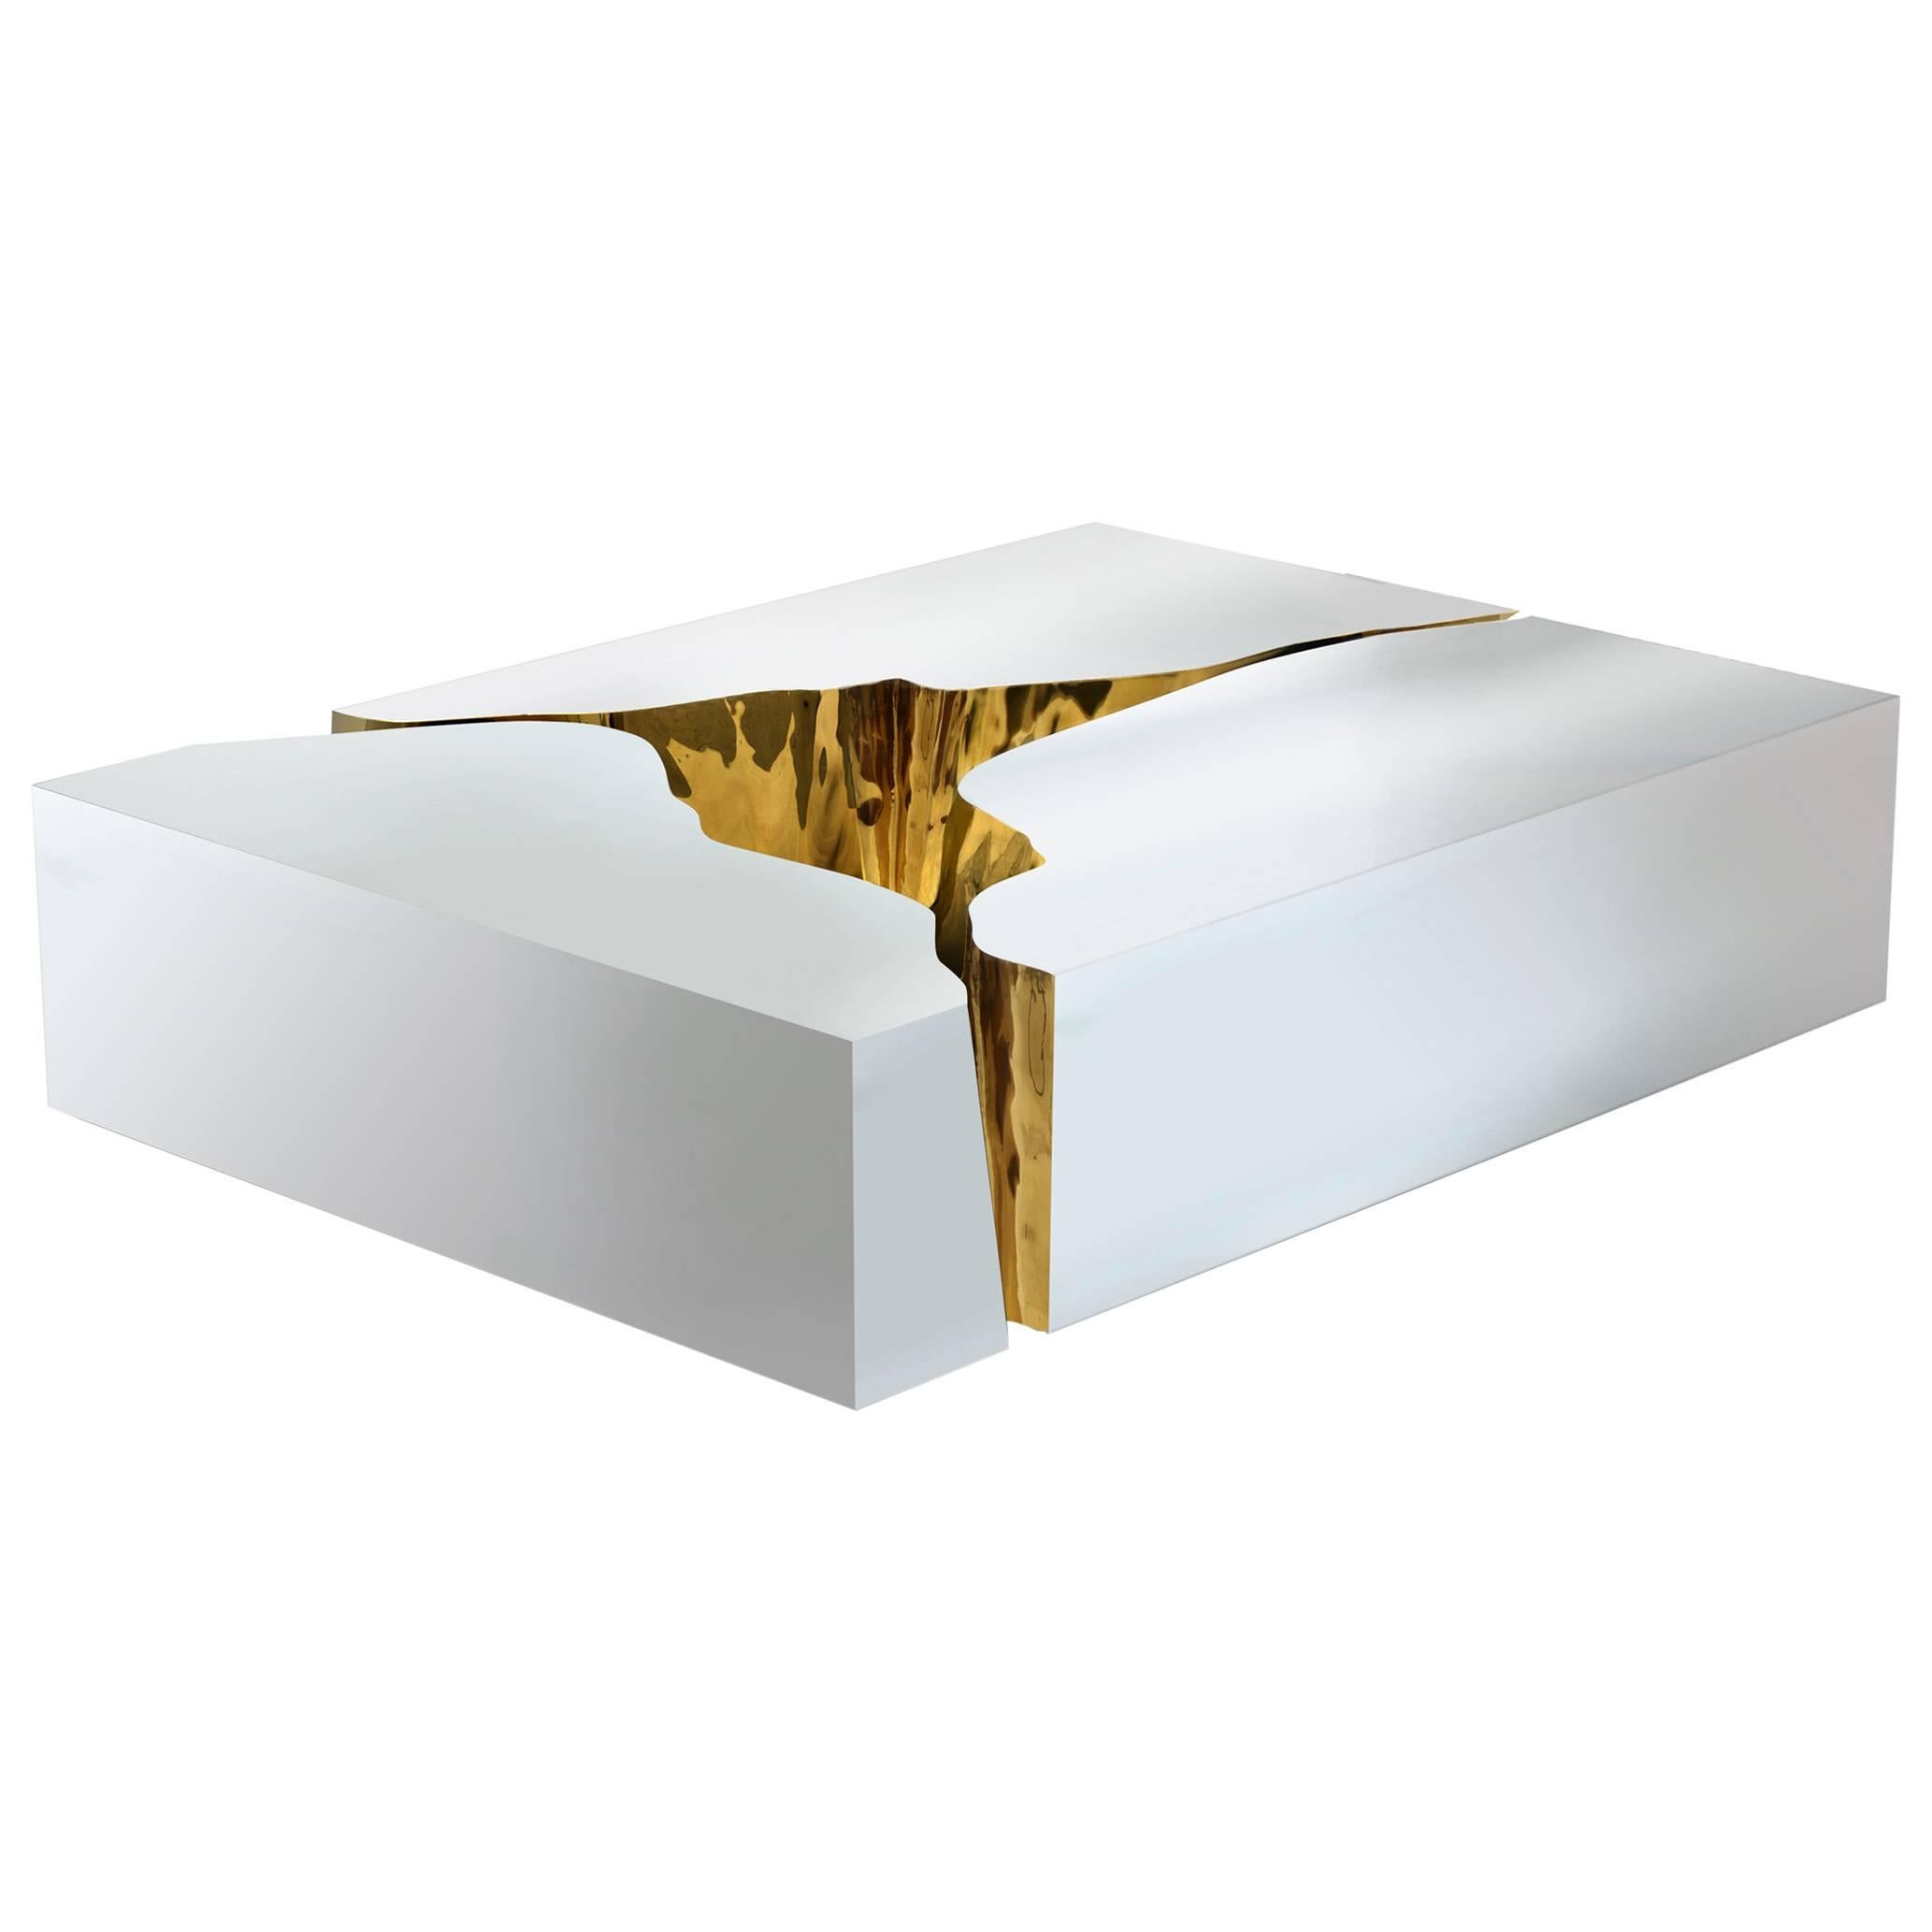 Paradise Coffee Table in coated polished stainless steel and Polished Brass